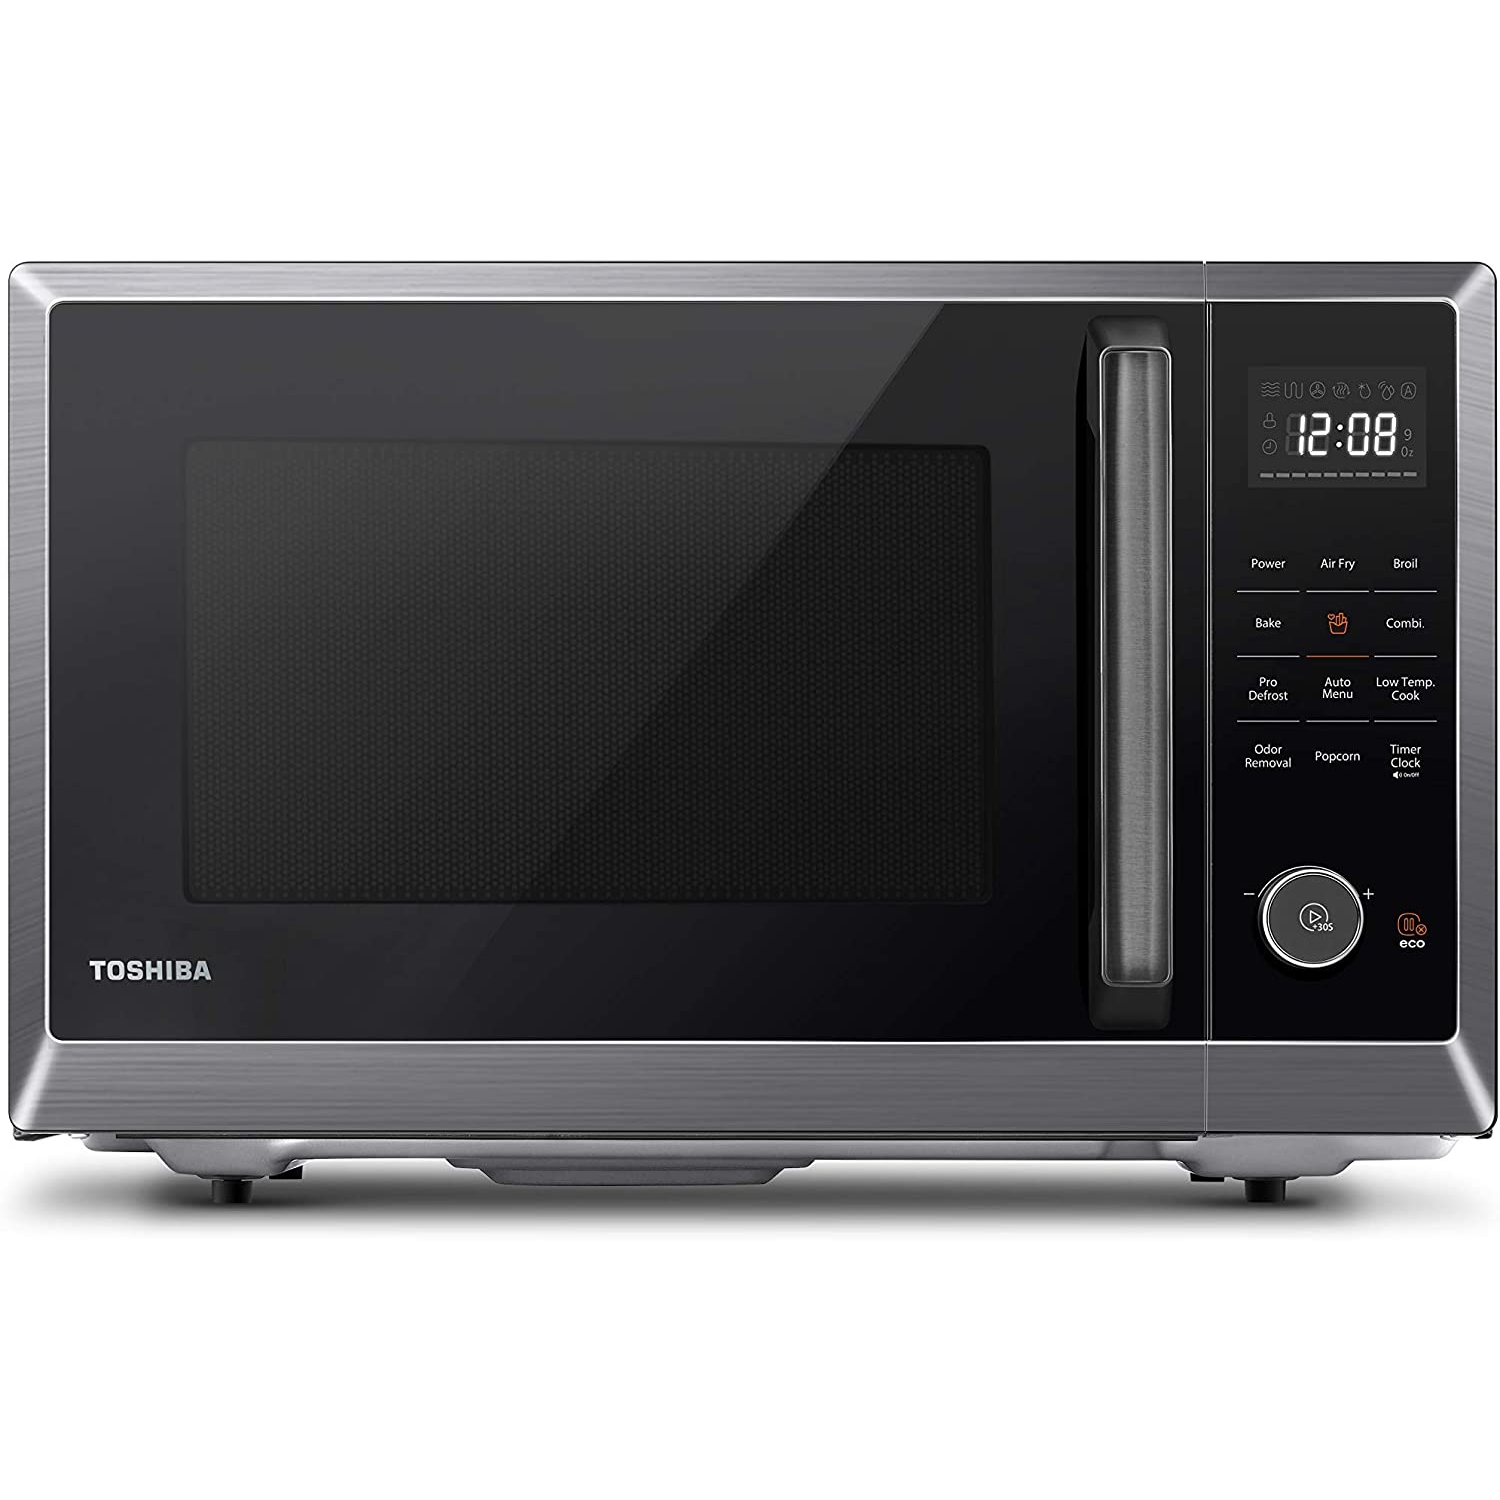 TOSHIBA 8-in-1 Countertop Microwave with Air Fryer Microwave Combo, Convection, Mute Function, 1.0 Cu.ft, Black stainless steel - (ML2-EC10SA)